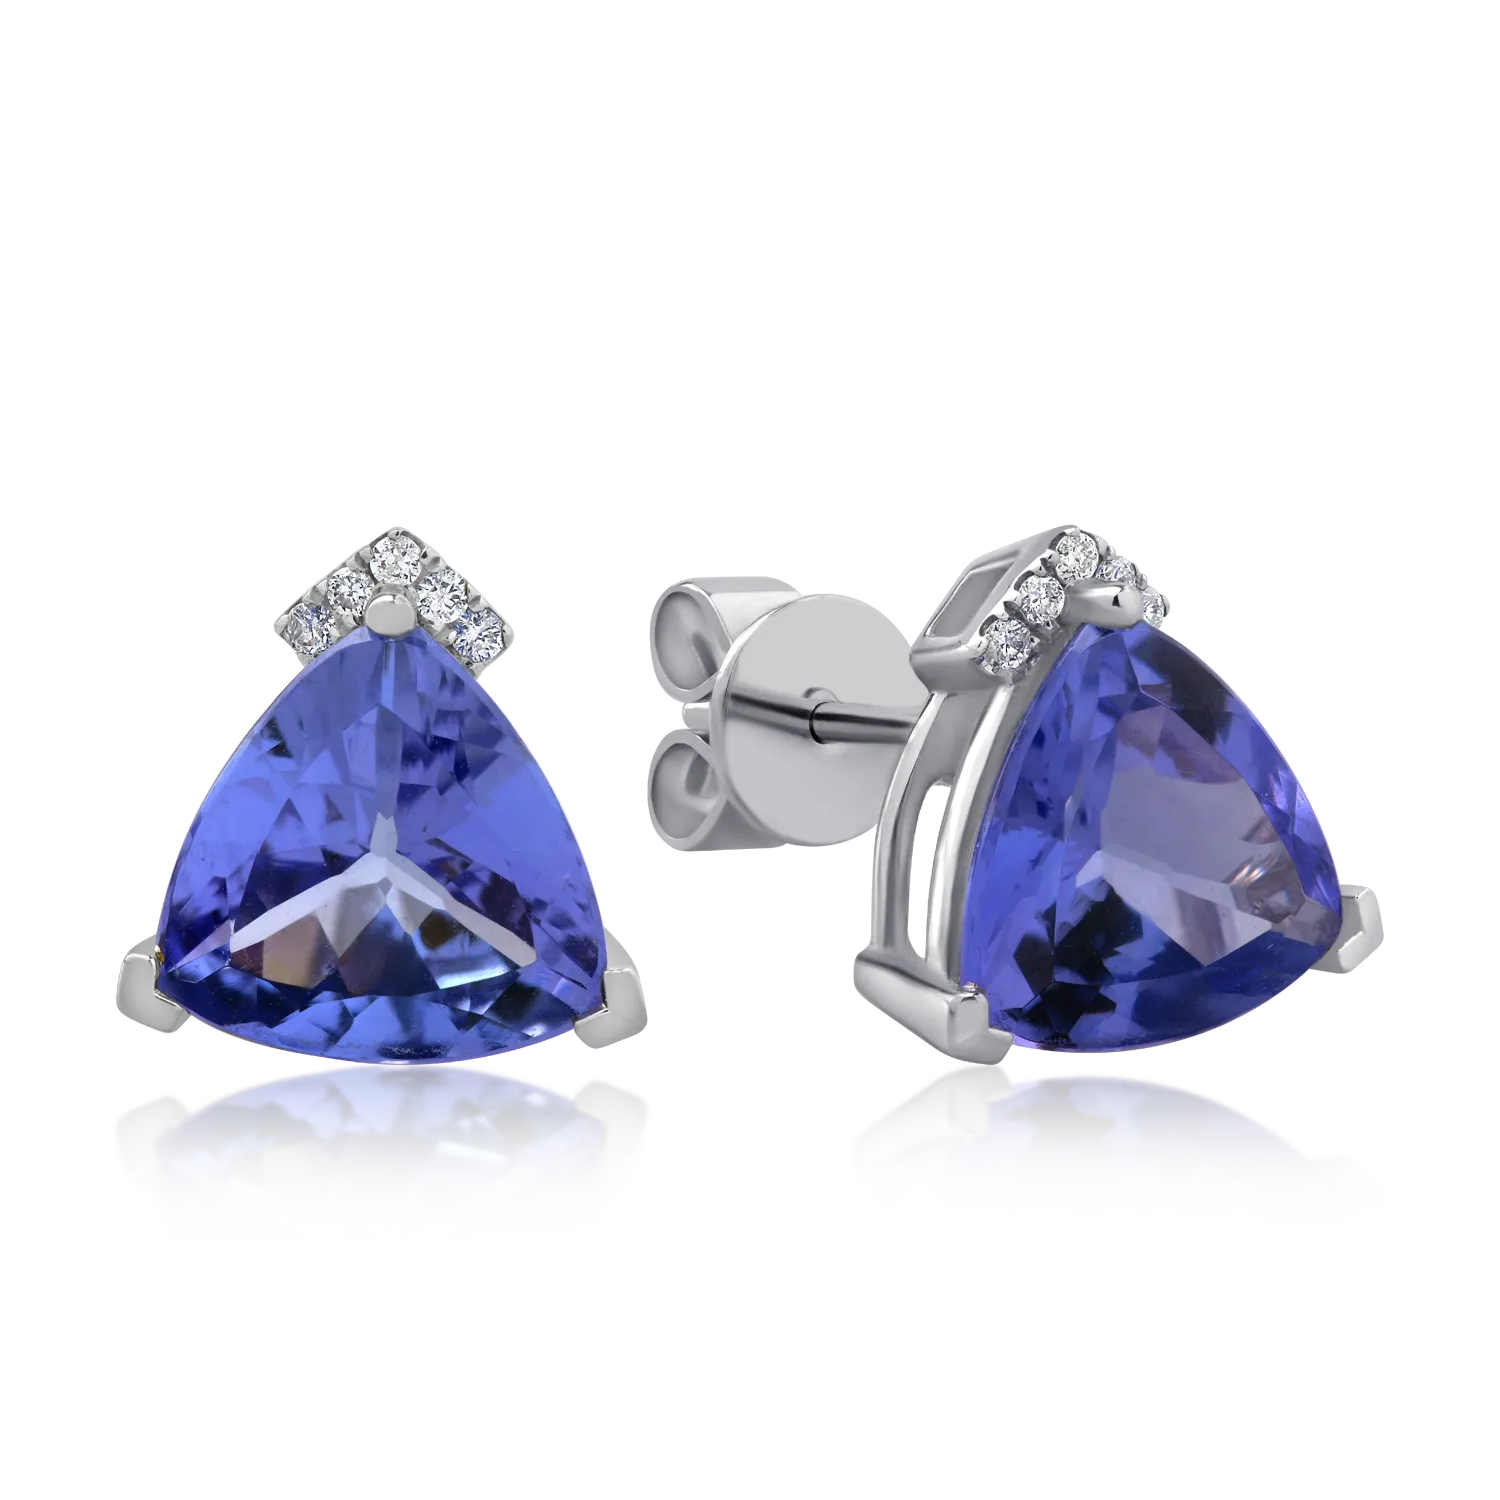 14K white gold earrings with 4.41ct tanzanites and 0.05ct diamonds